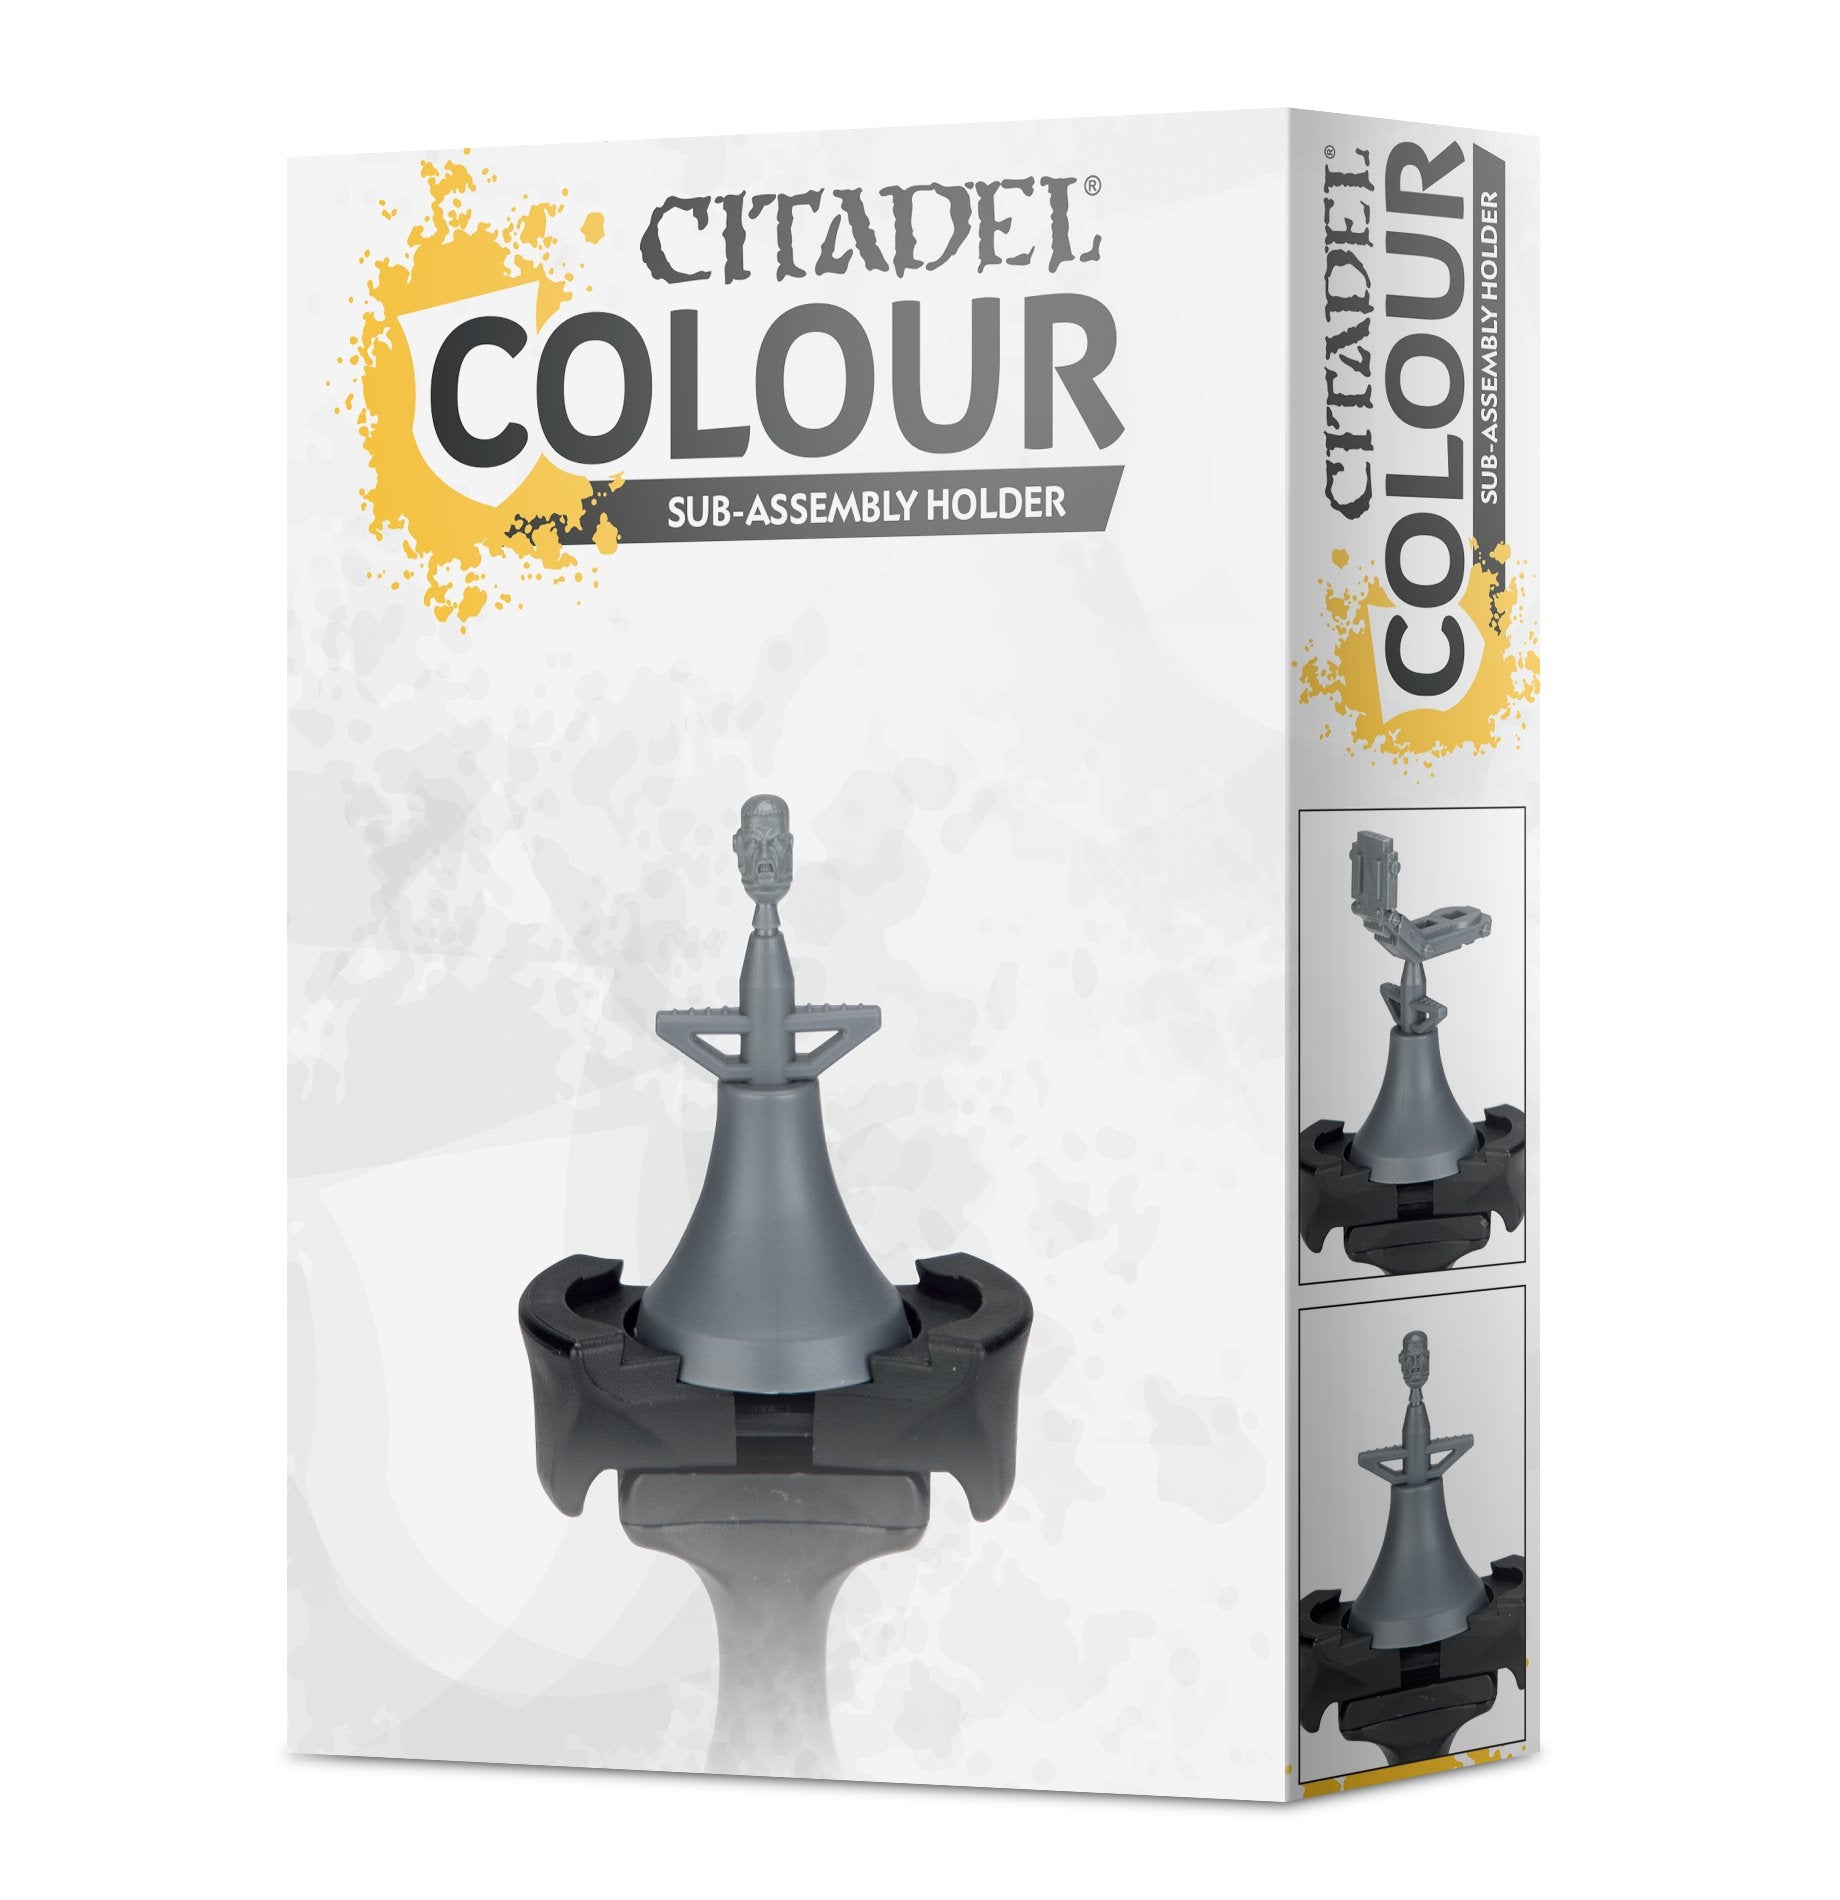 Citadel Colour Sub-assembly Holder | Jack's On Queen